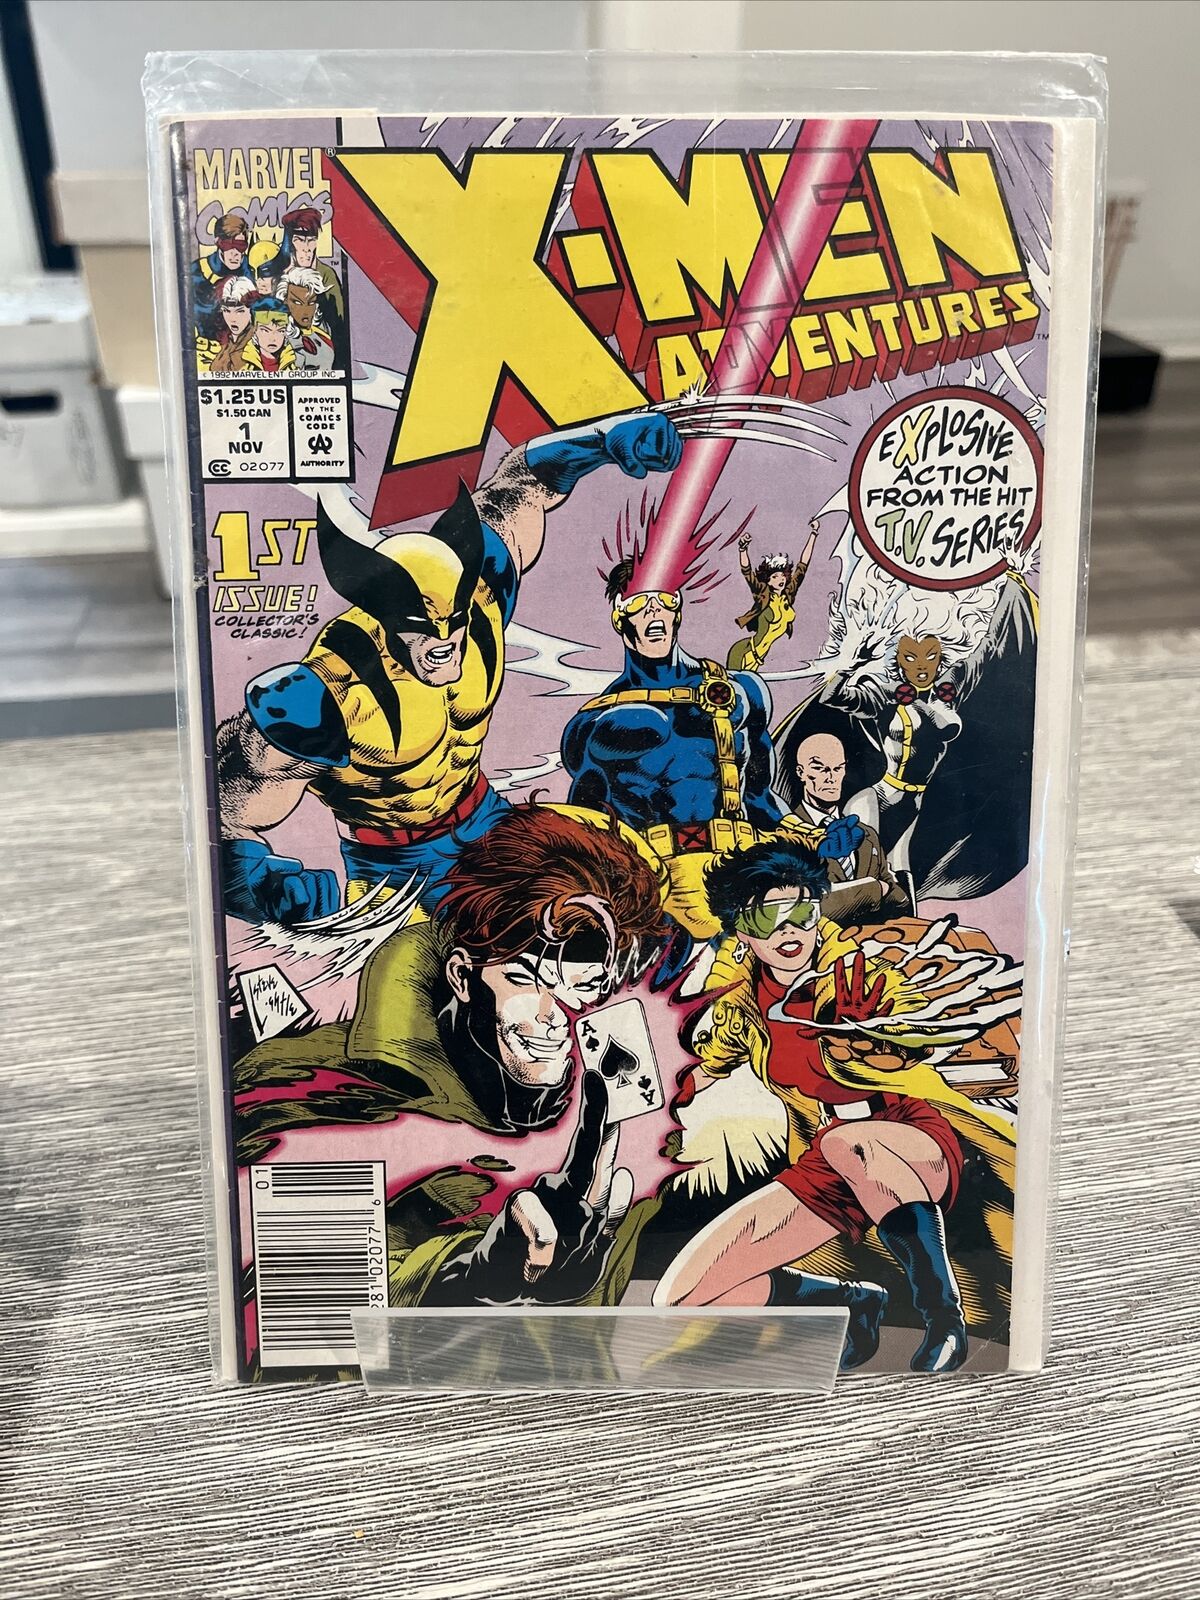 X-MEN ADVENTURES #1 (1992) BASED ON THE ICONIC ANIMATED SHOW. NEWSSTAND EDITION